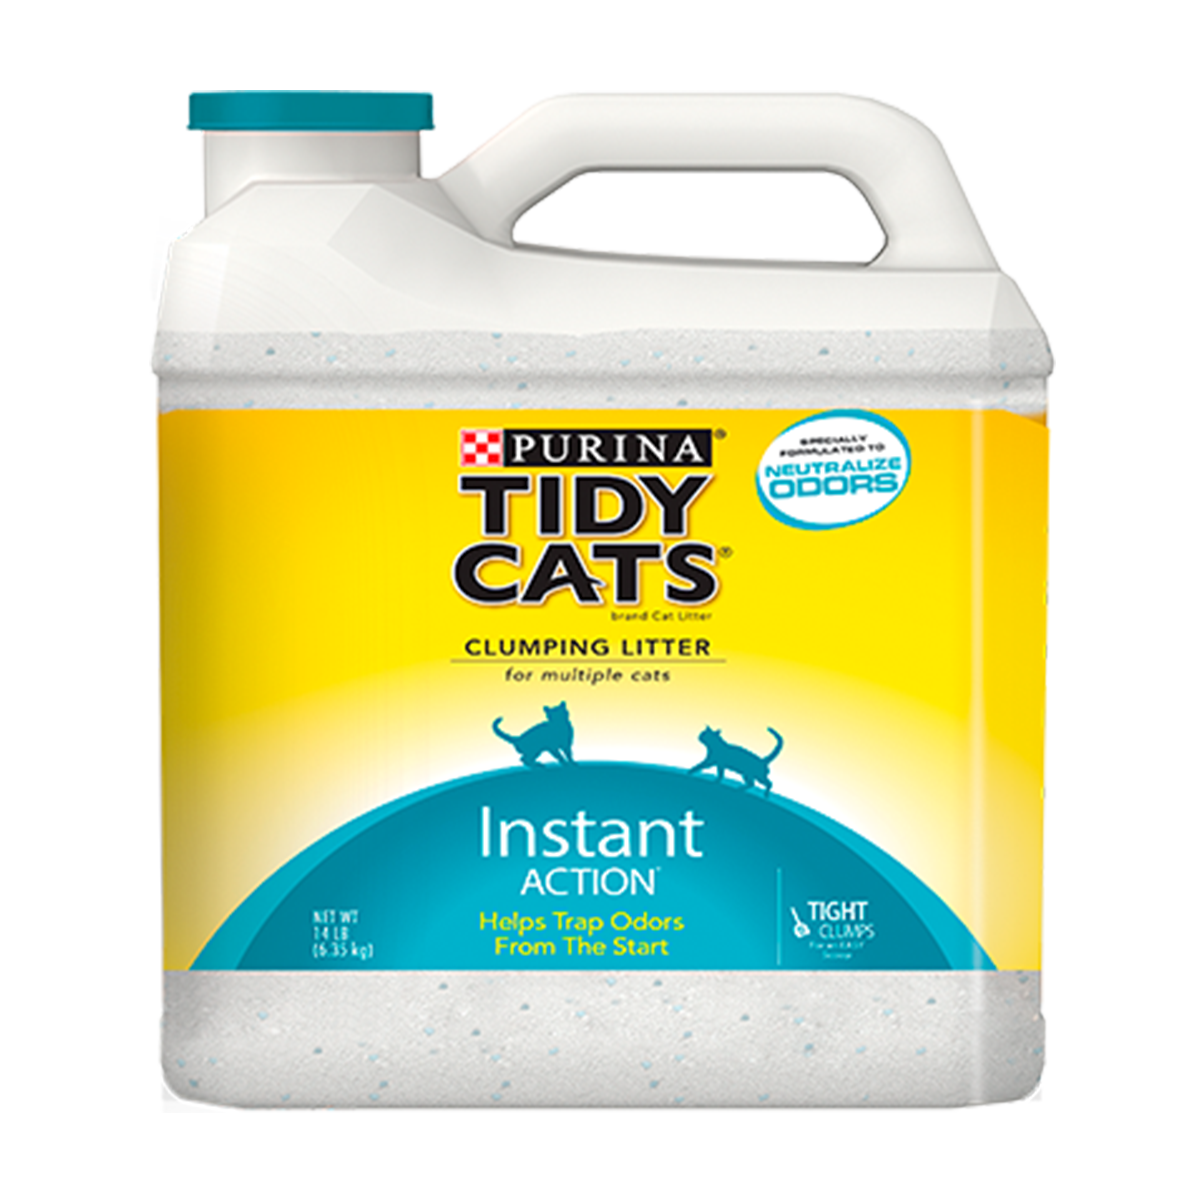 Purina%20Tidy%20Cats%C2%AE%20instant%20action%20%281%29_0.png